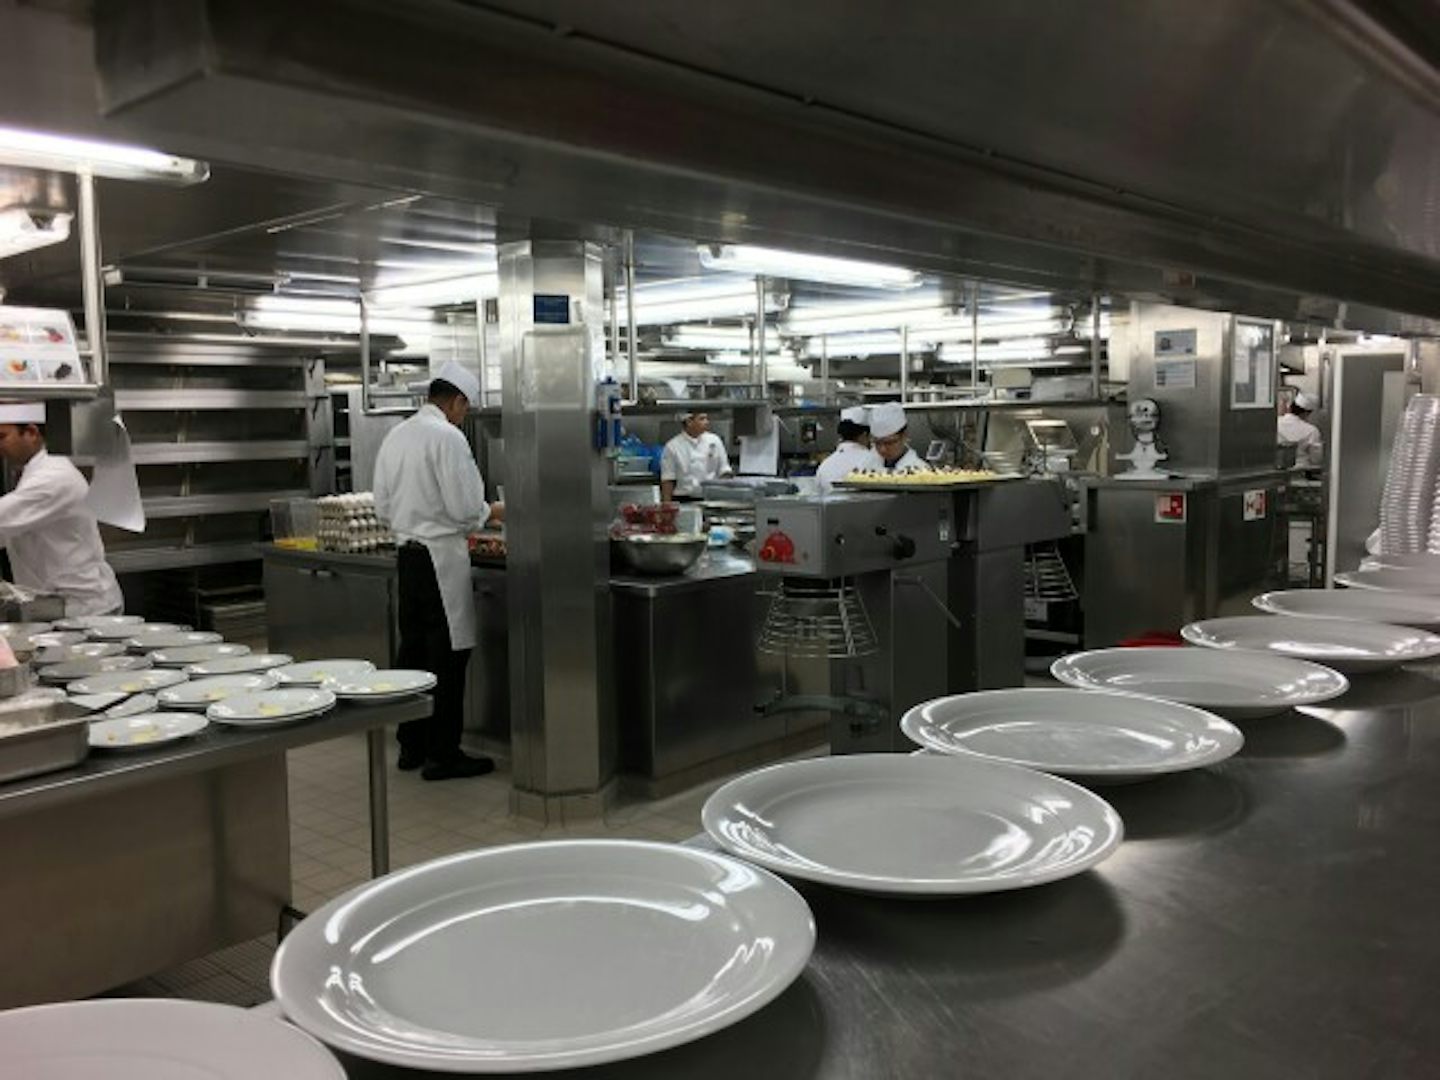 Getting Ready for Lunch in the Main Galley